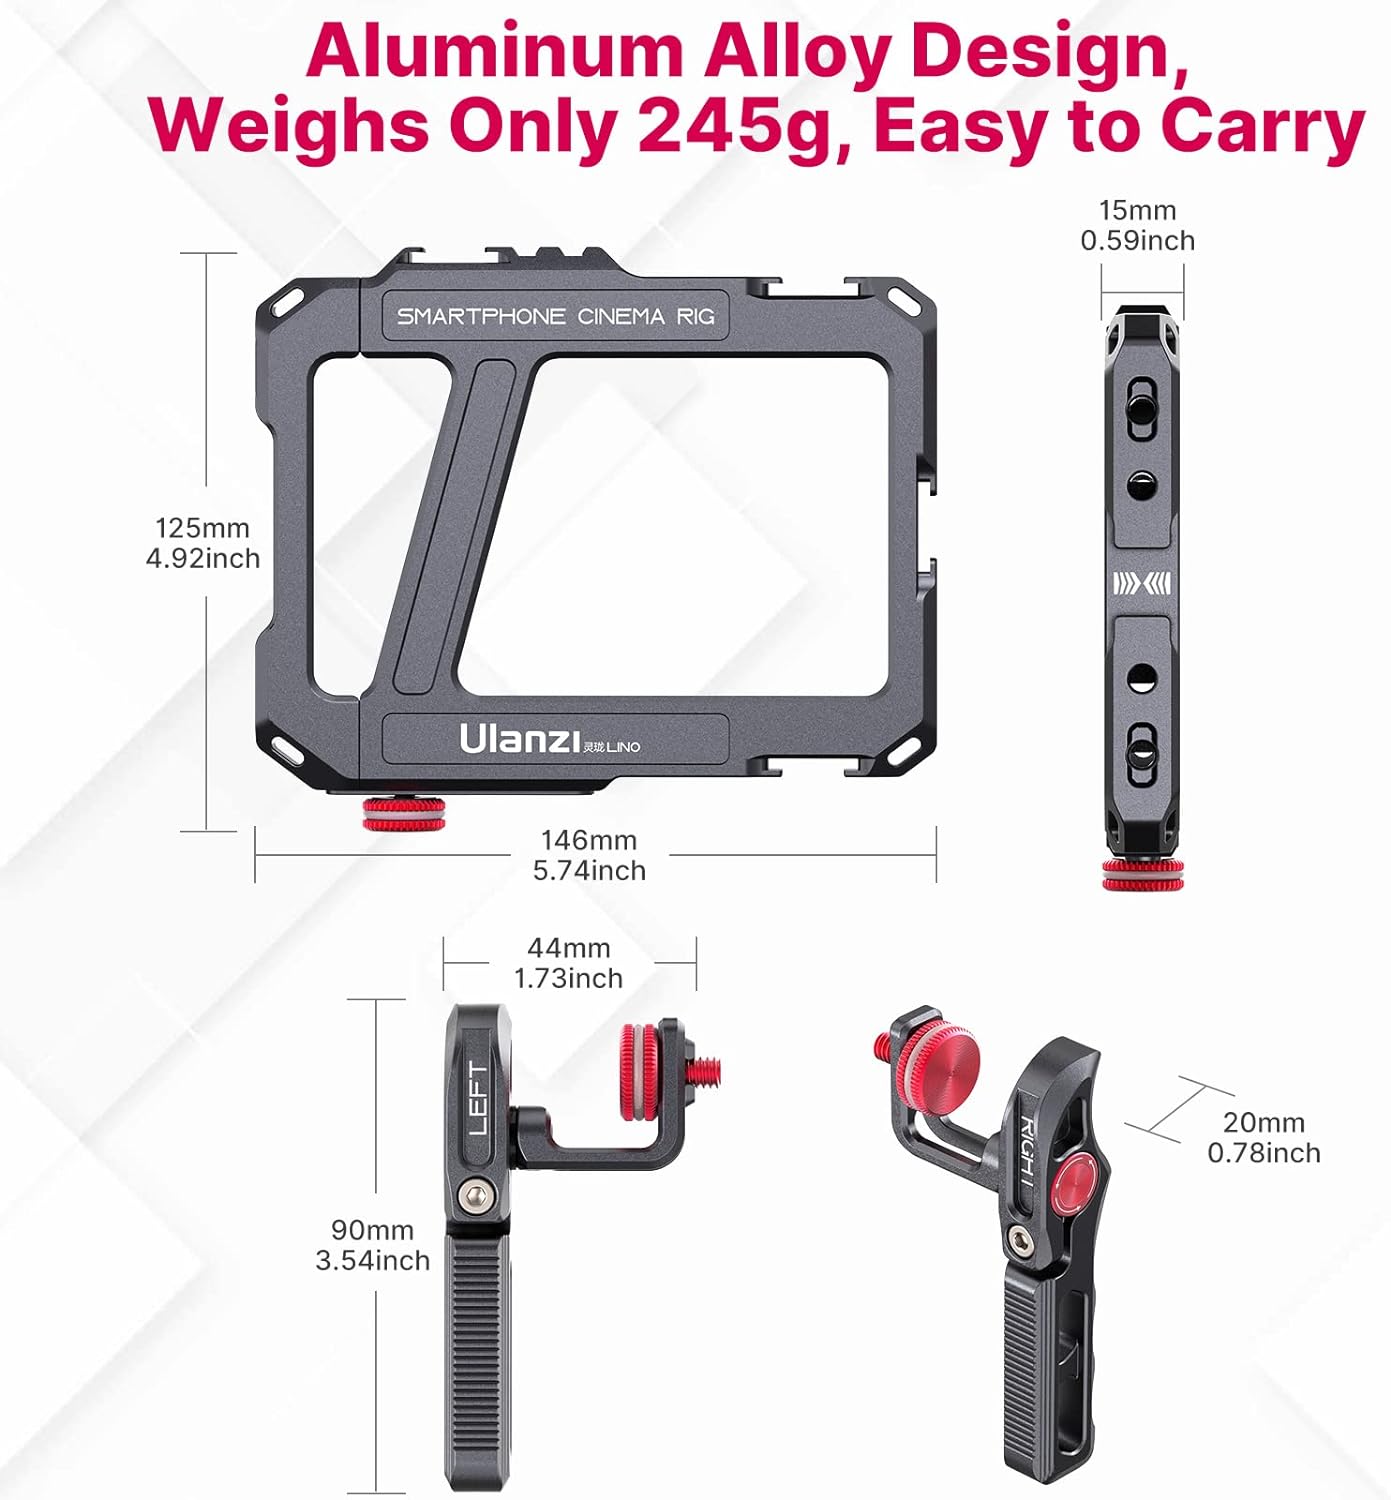 ULANZI Smartphone Video Rig with Handle, LINO Filmmaking Case Aluminum Alloy Phone Video Stabilizer Grip Tripod Mount for Video Maker Videographer with Cold Shoe for iPhone 13 Mini Pro Max 8 Plus